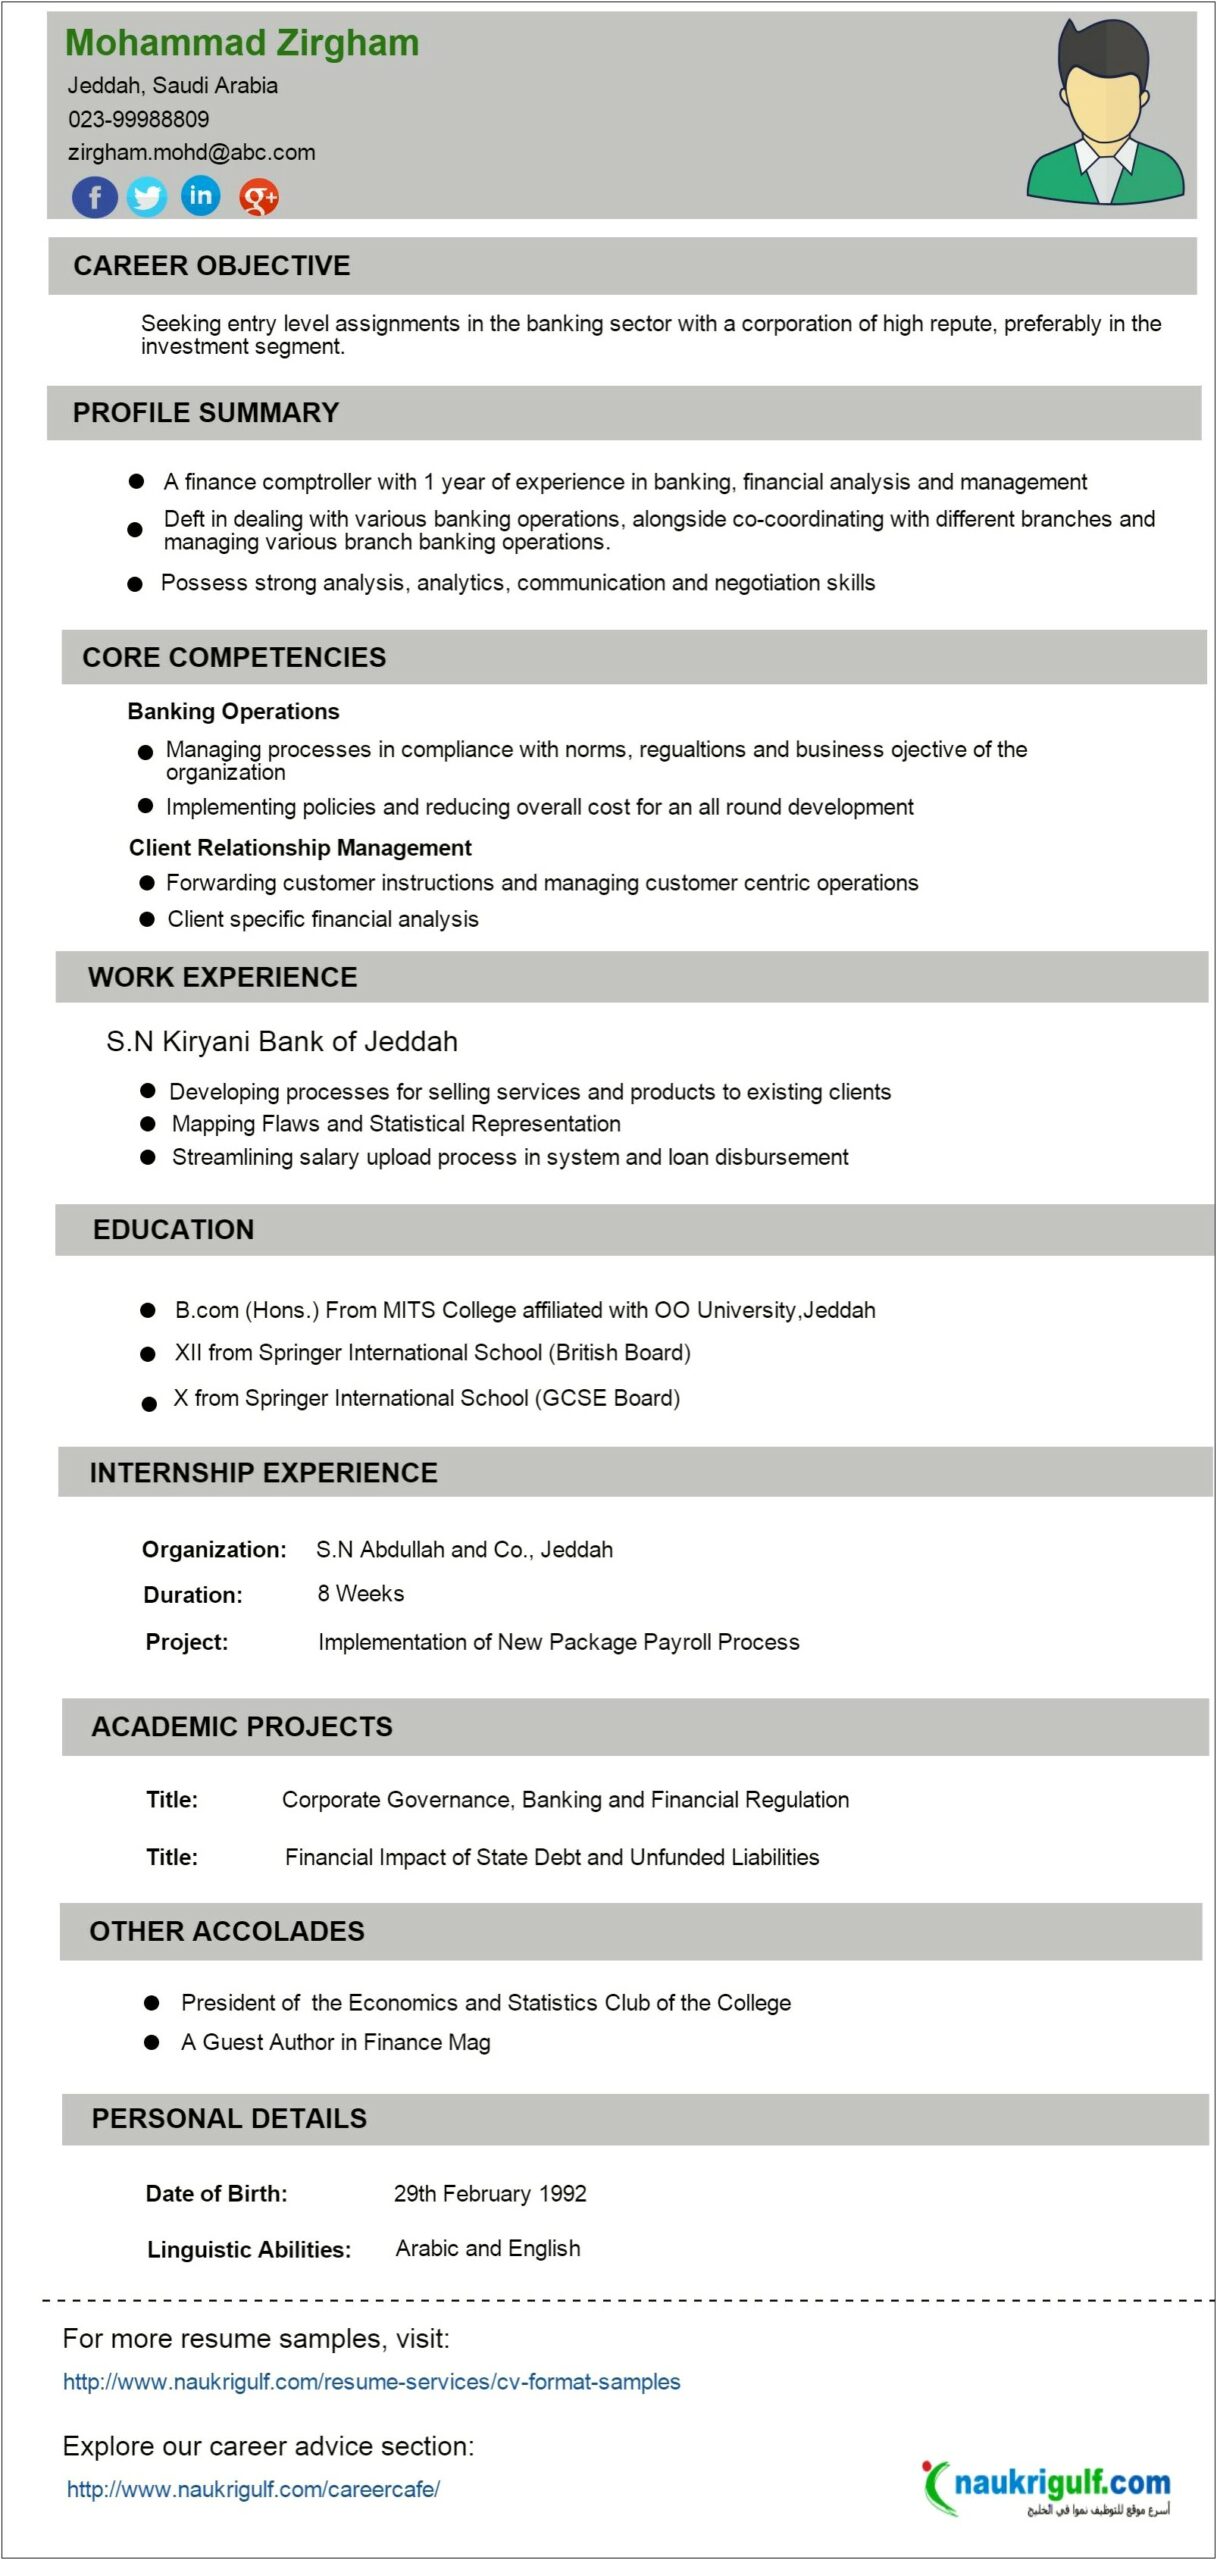 Resume Summary Statement For Various Financial Jobs